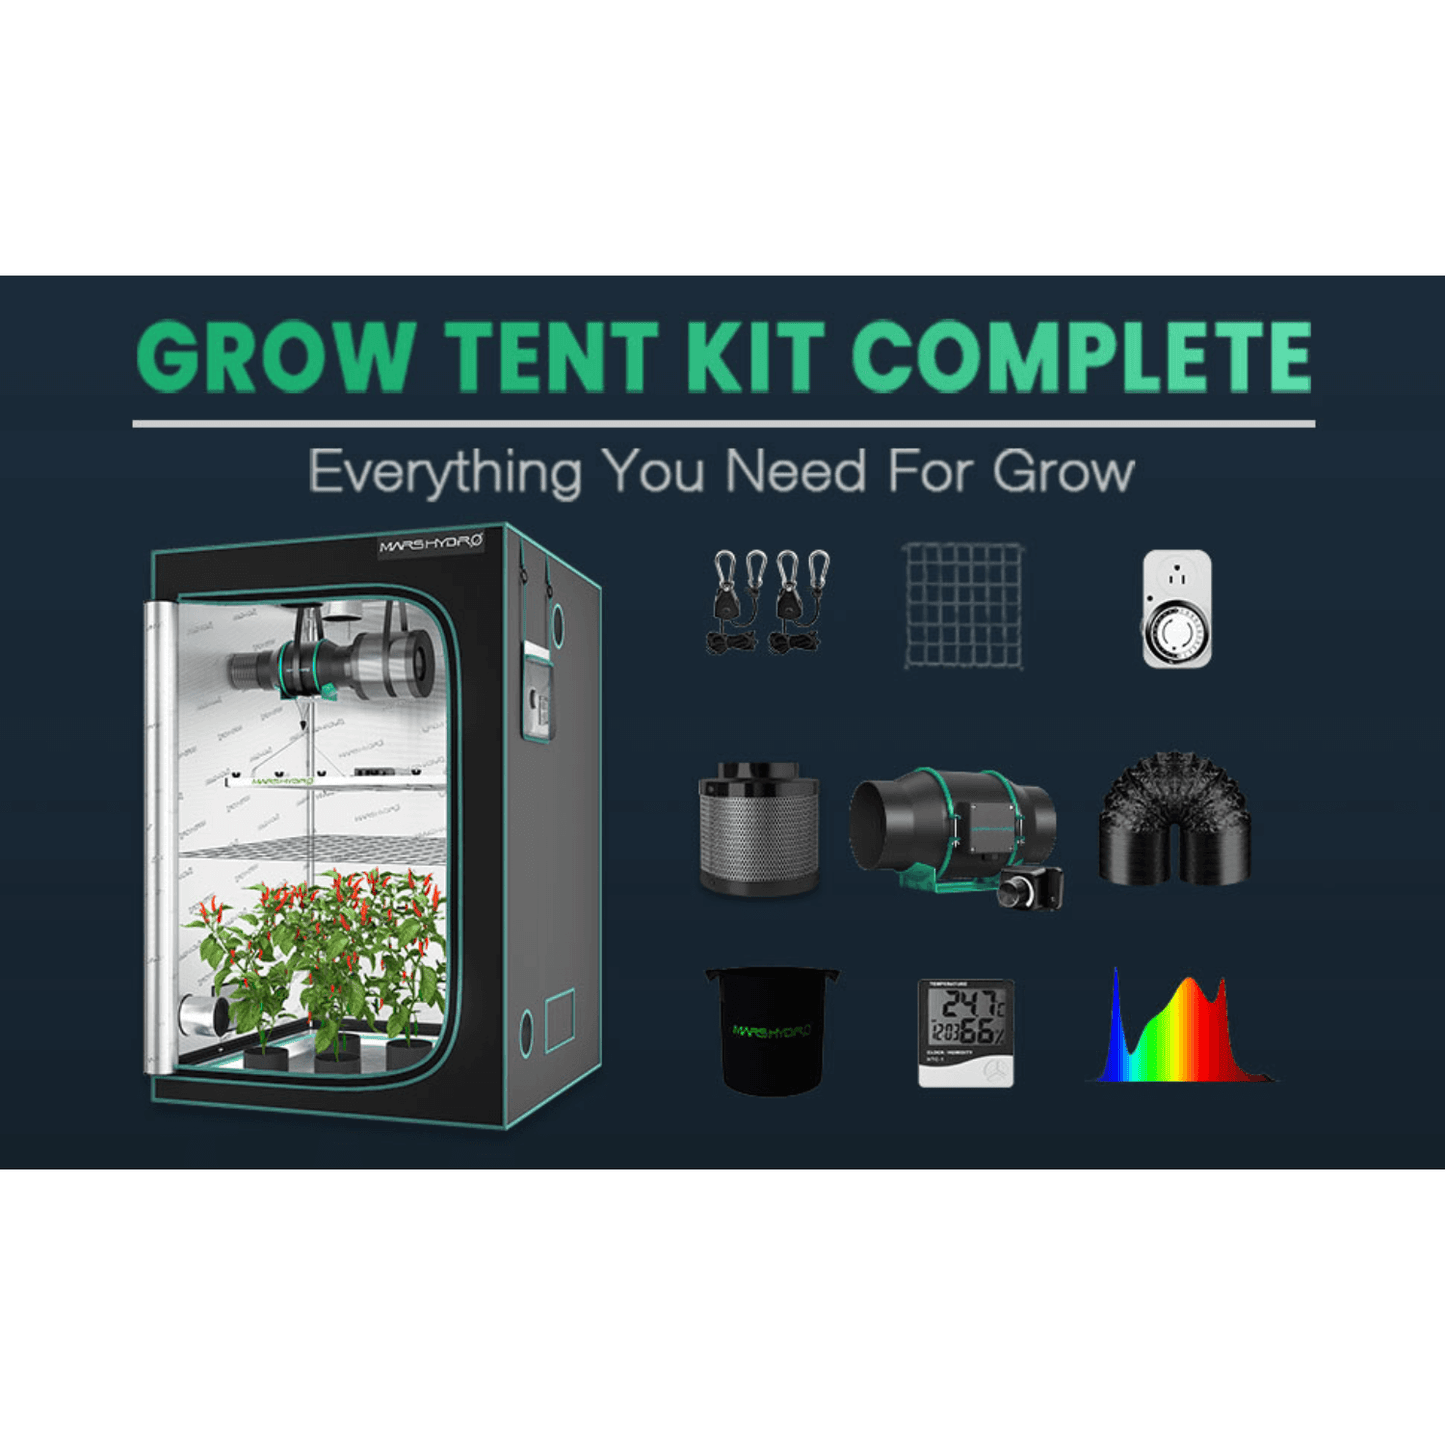 Mars Hydro FC-E4800 LED Grow Light + 4' x 4' Grow Tent + Inline Fan Combo with Speed Controller MH-FC-E4800-SET Kits